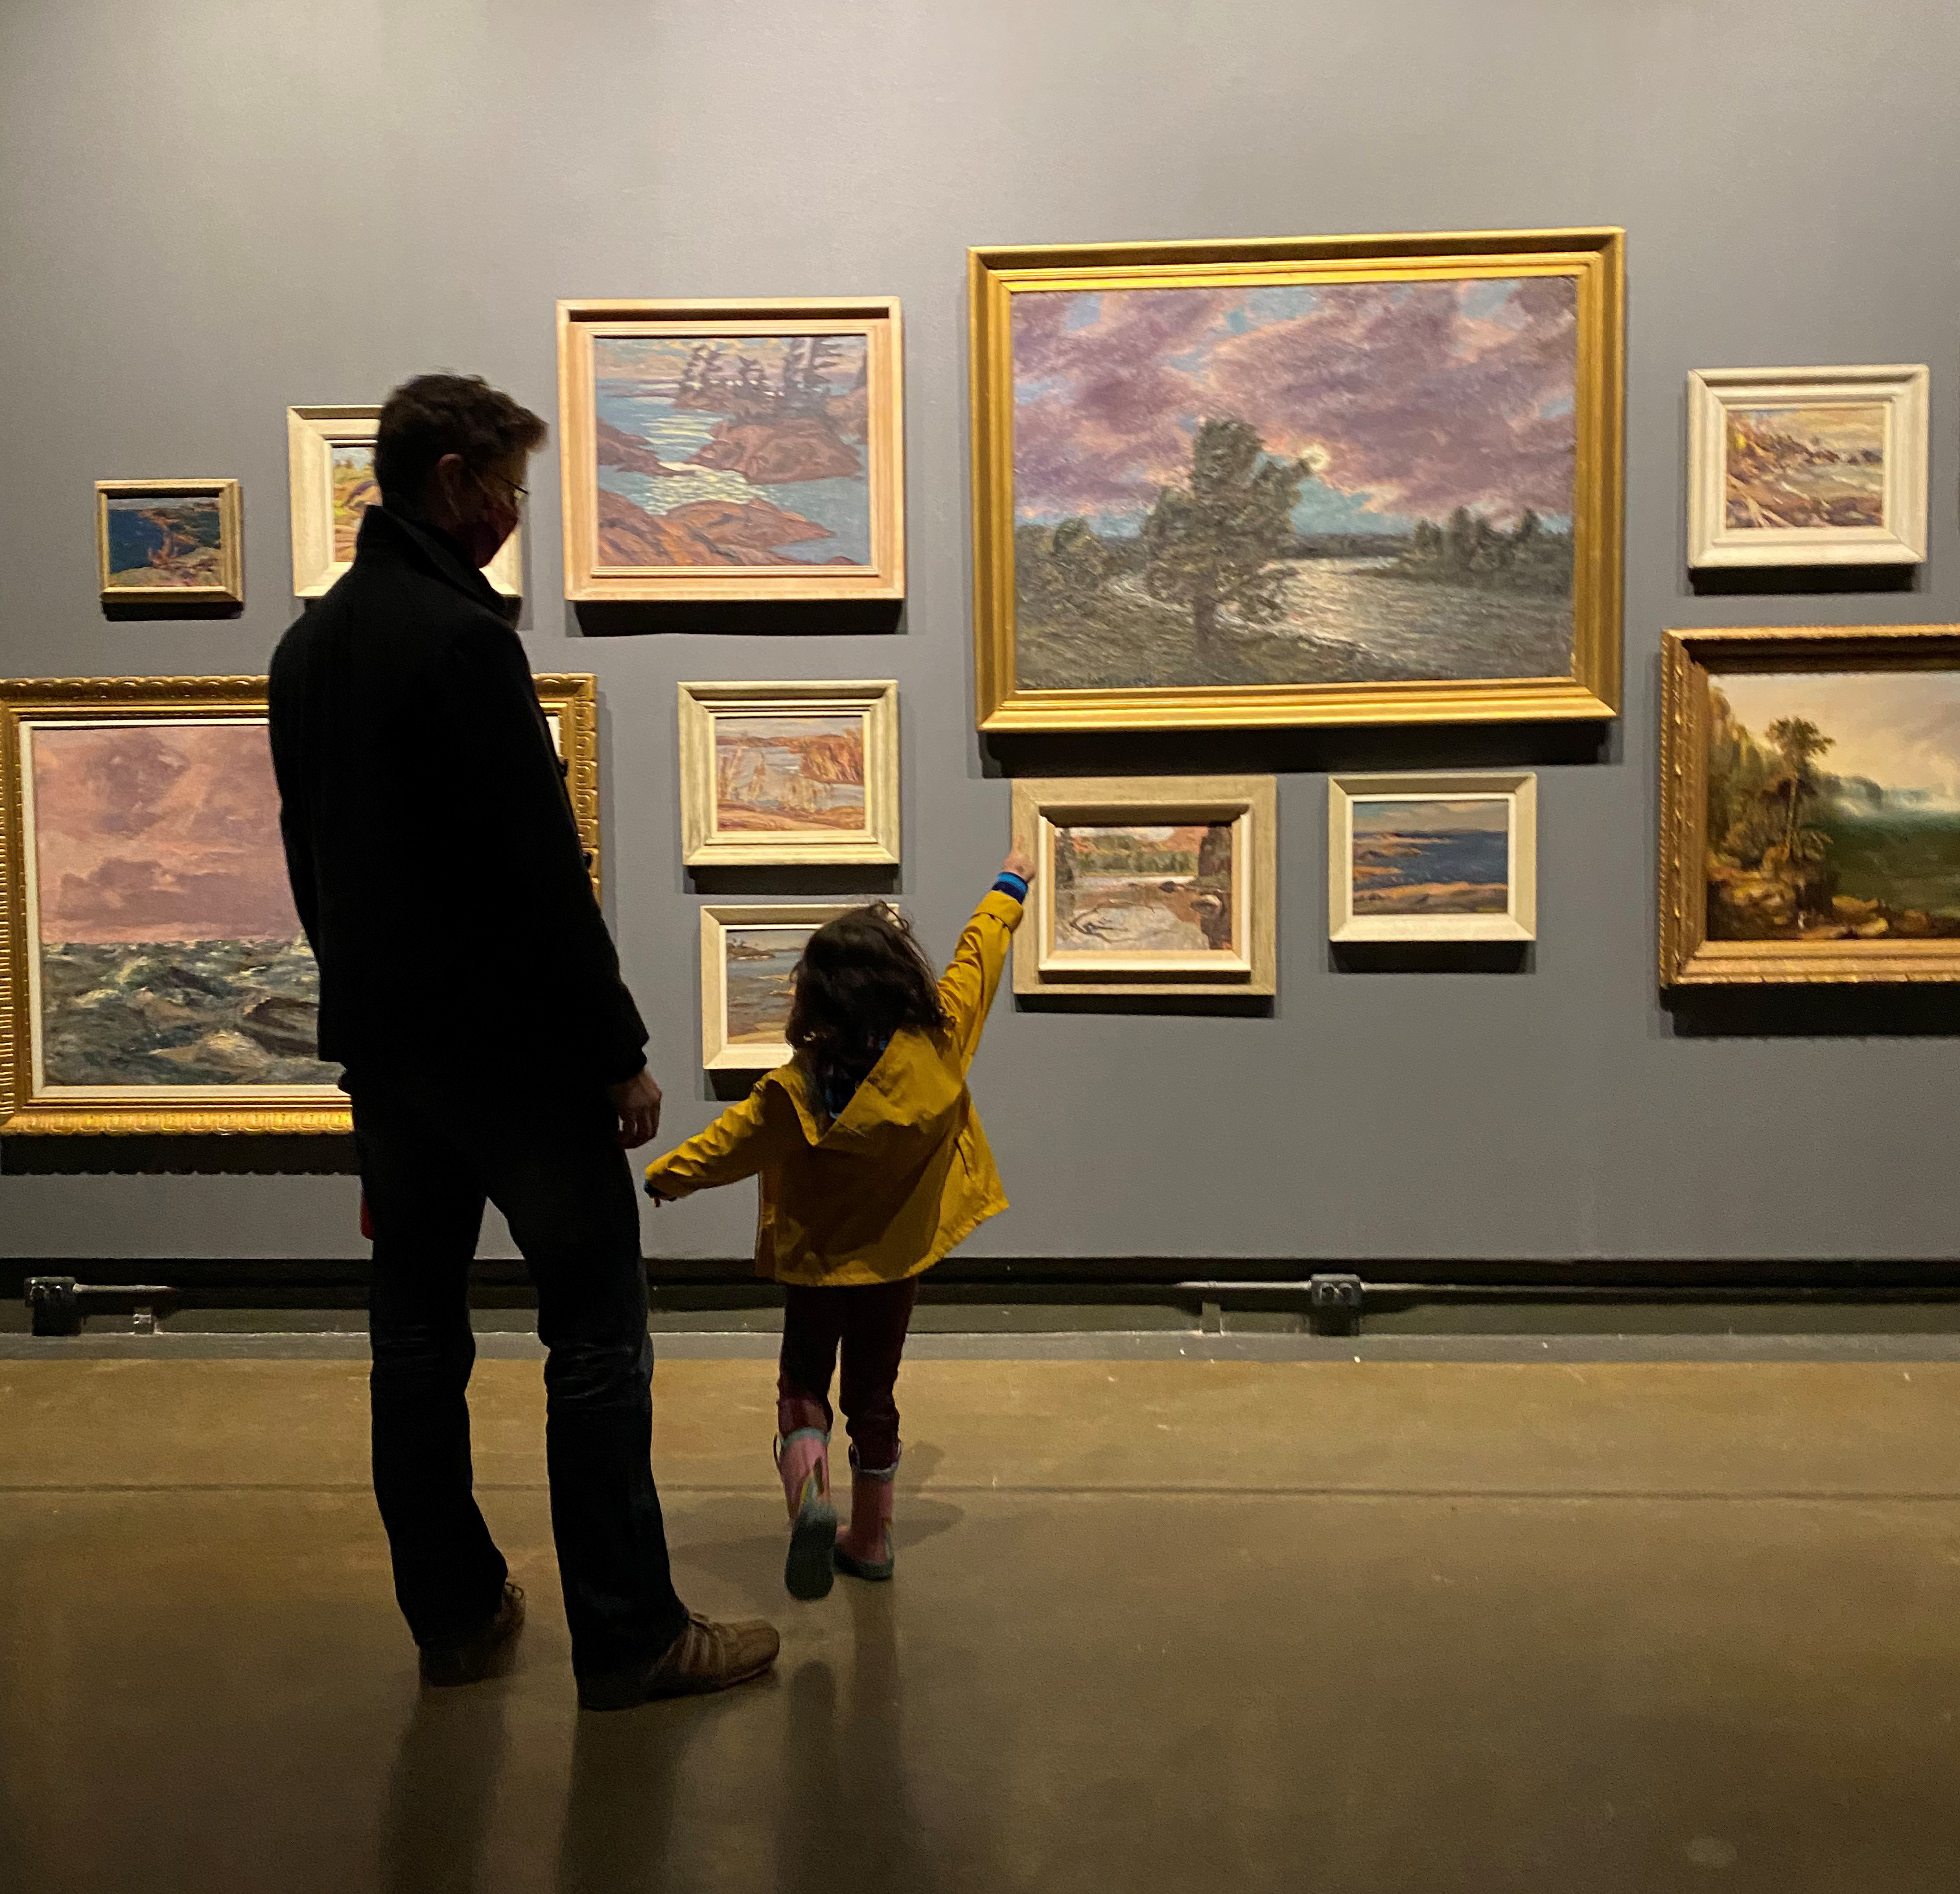 A father and daughter looking at art in the gallery